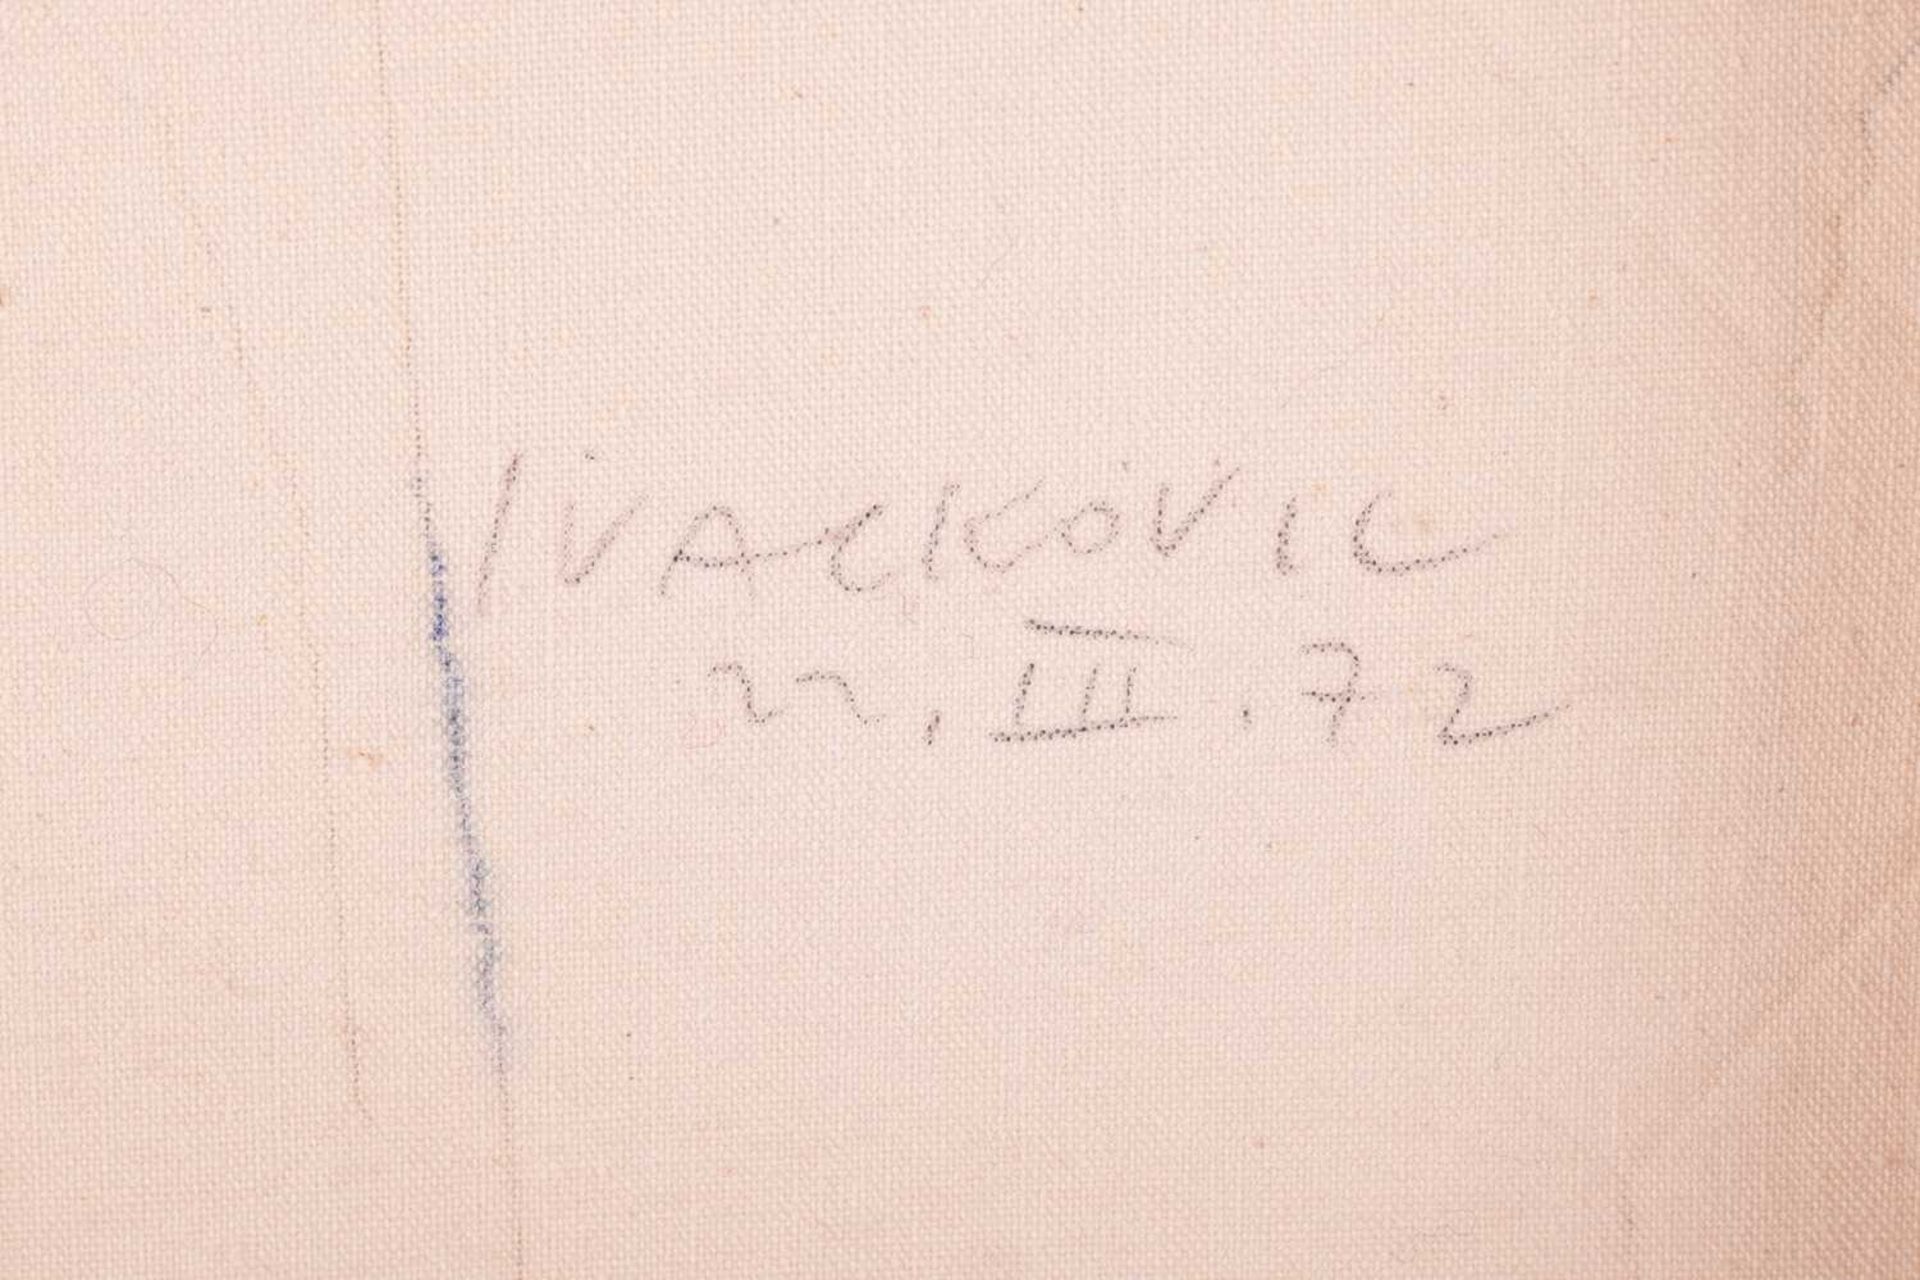 Djoka Ivackovic (1930-2012) Yugoslavian, untitled, oil on canvas, signed and dated verso 22.03.1972, - Image 6 of 12